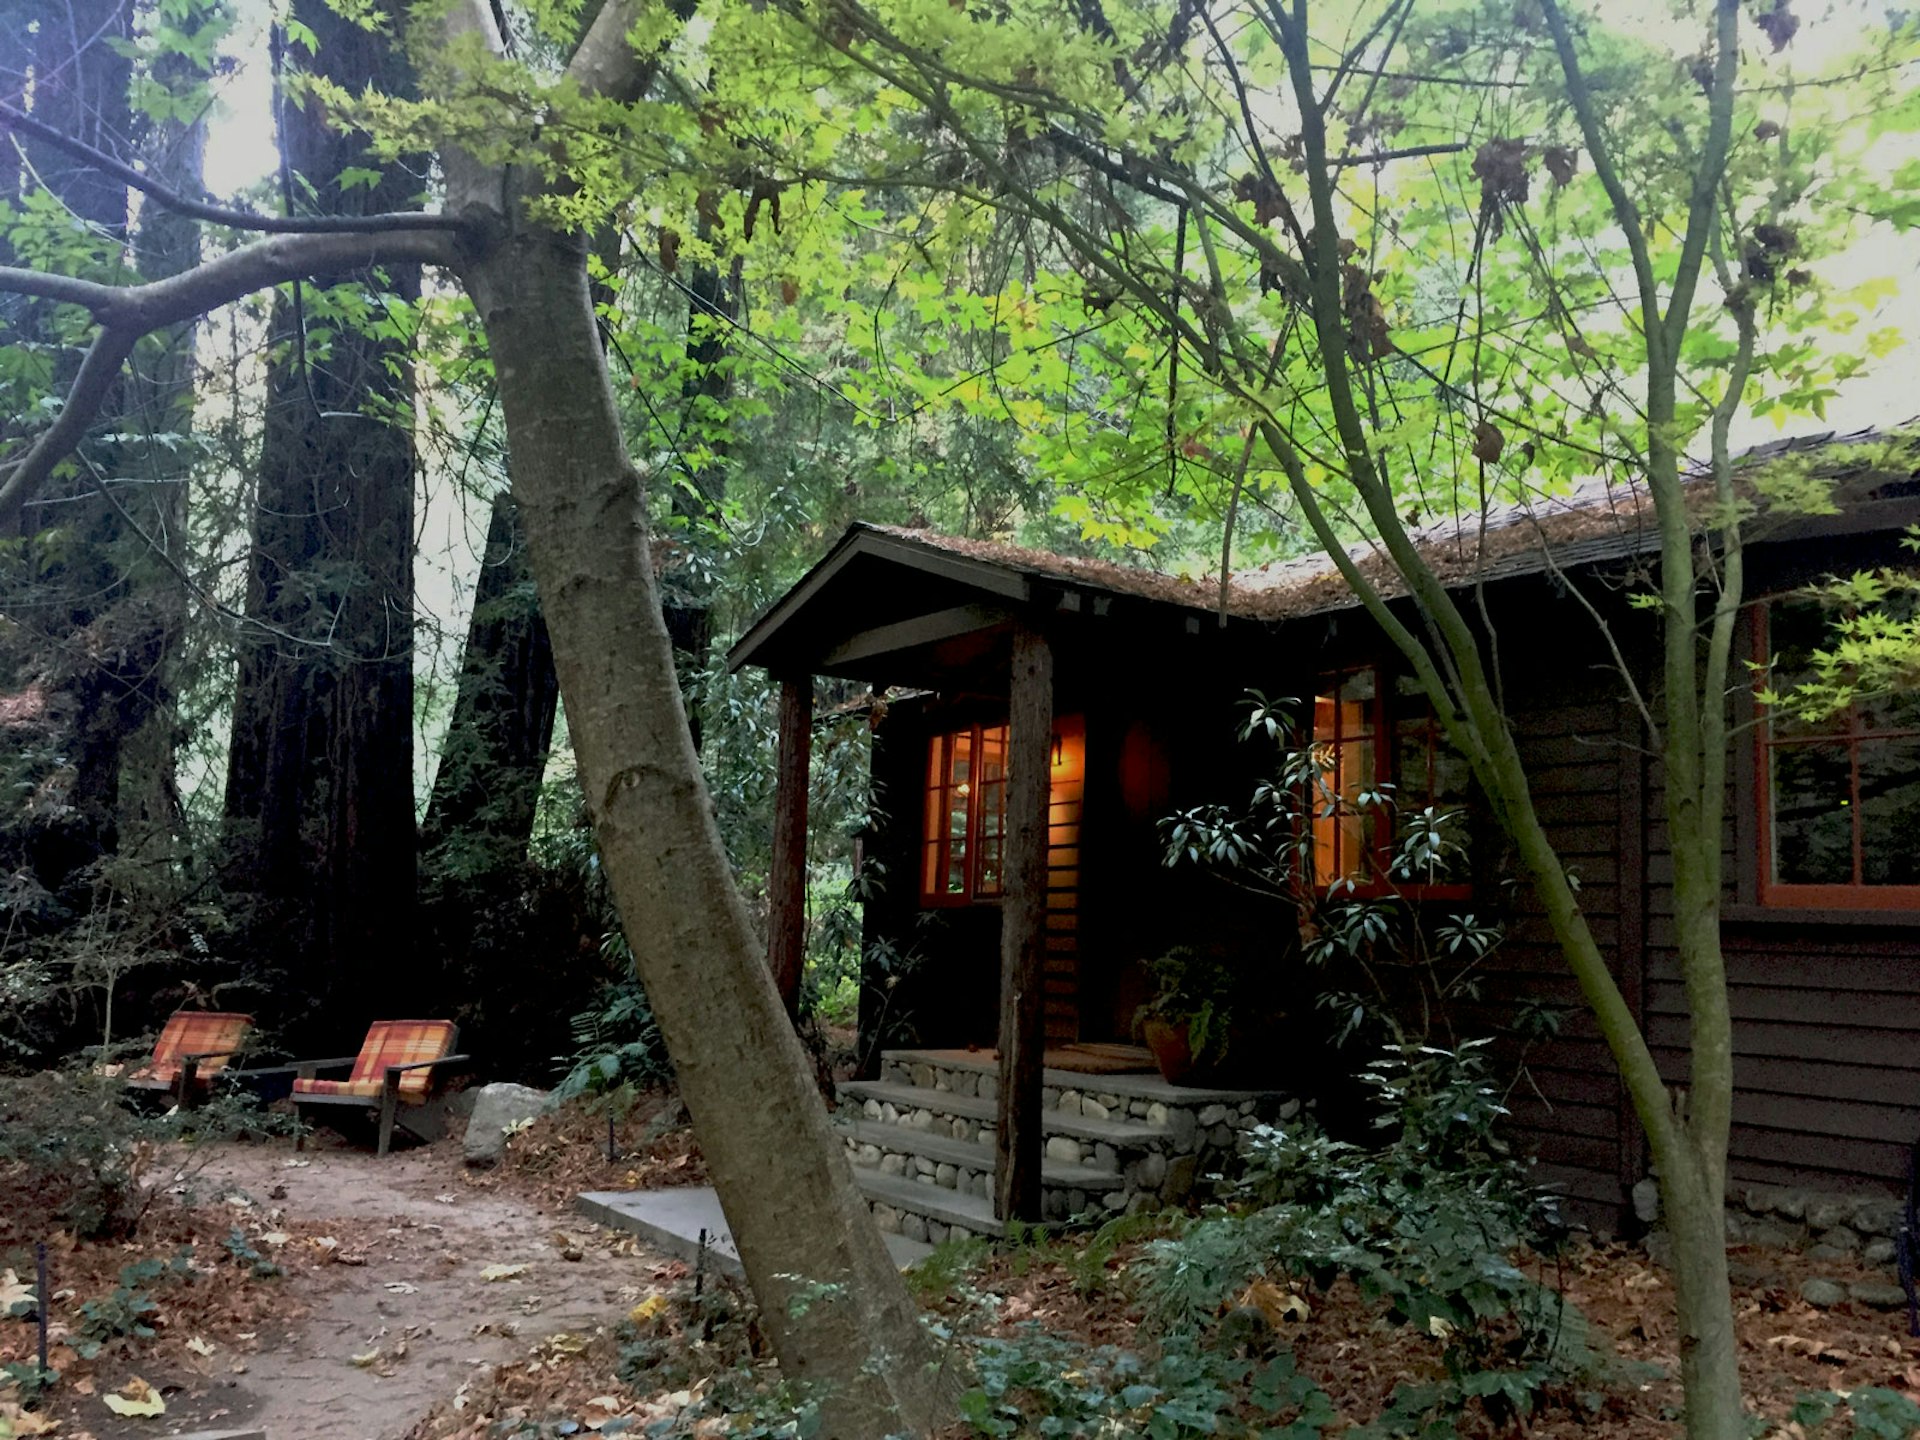 A cabin in the woods with two chairs in front